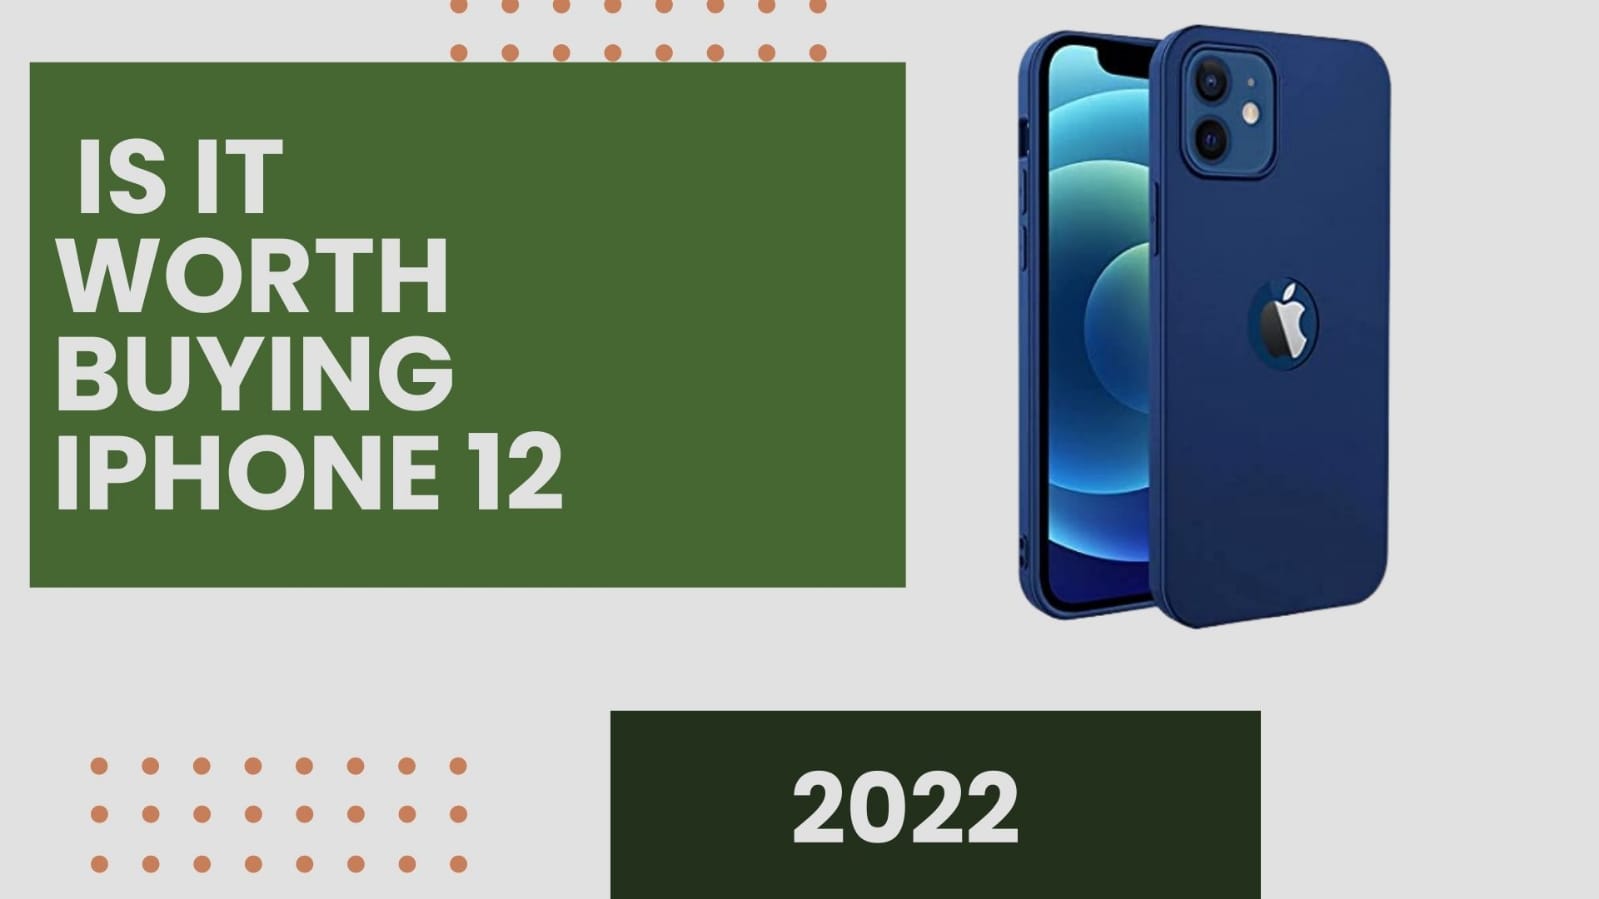 Is it worth buying the iPhone 12 in 2022?